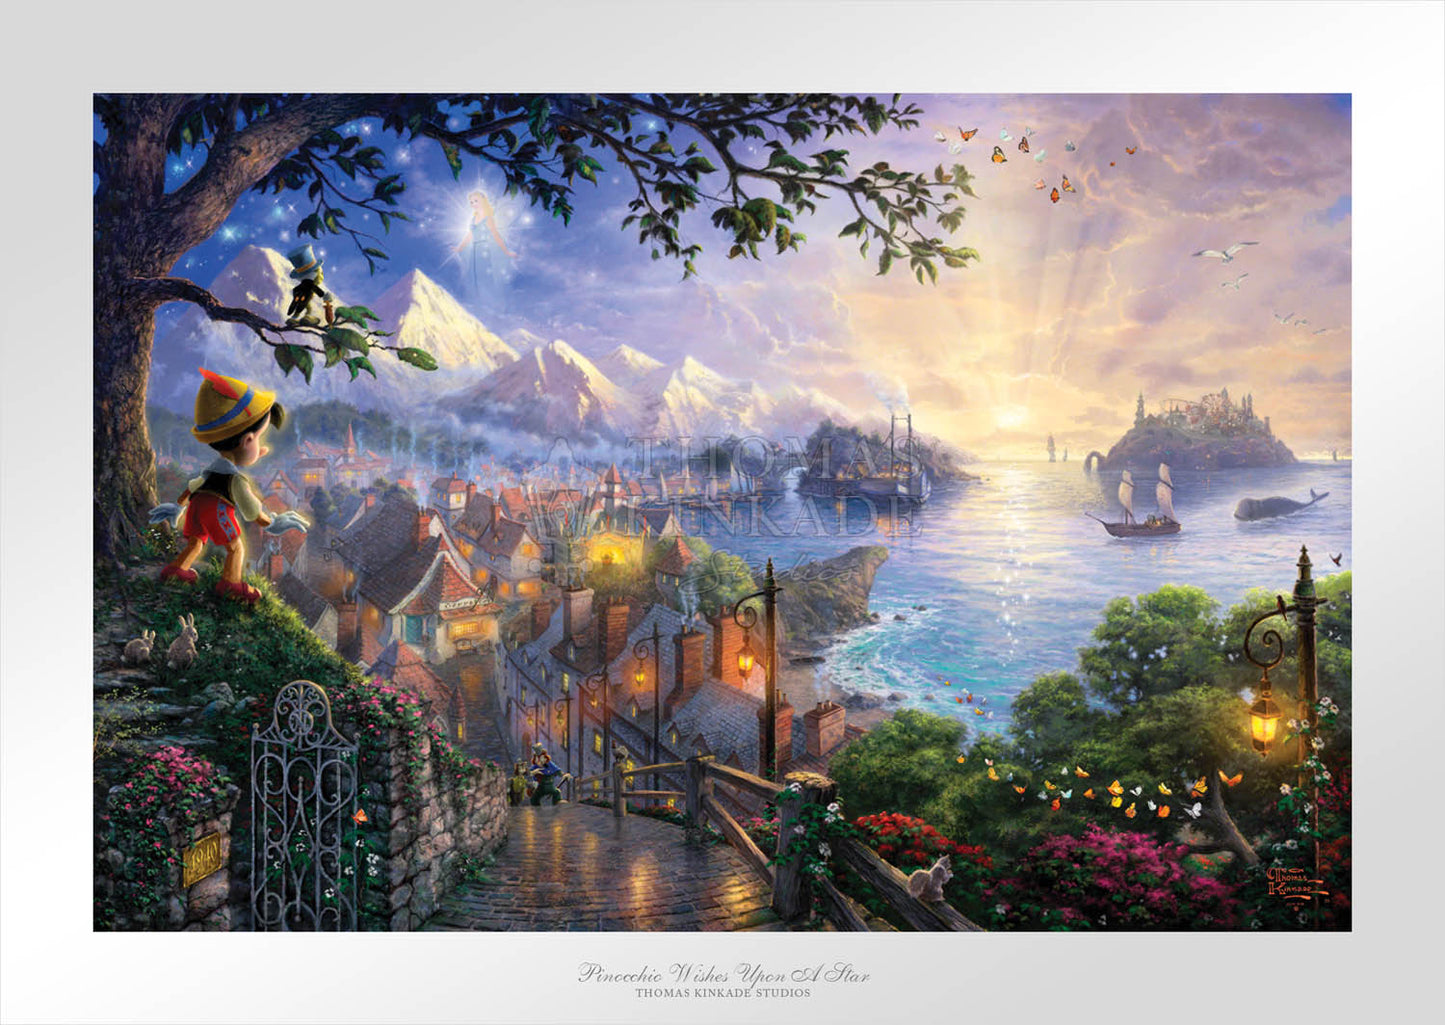 Thomas Kinkade Disney Dreams "Pinocchio Wishes Upon a Star" Canvas OR Paper Limited Giclee